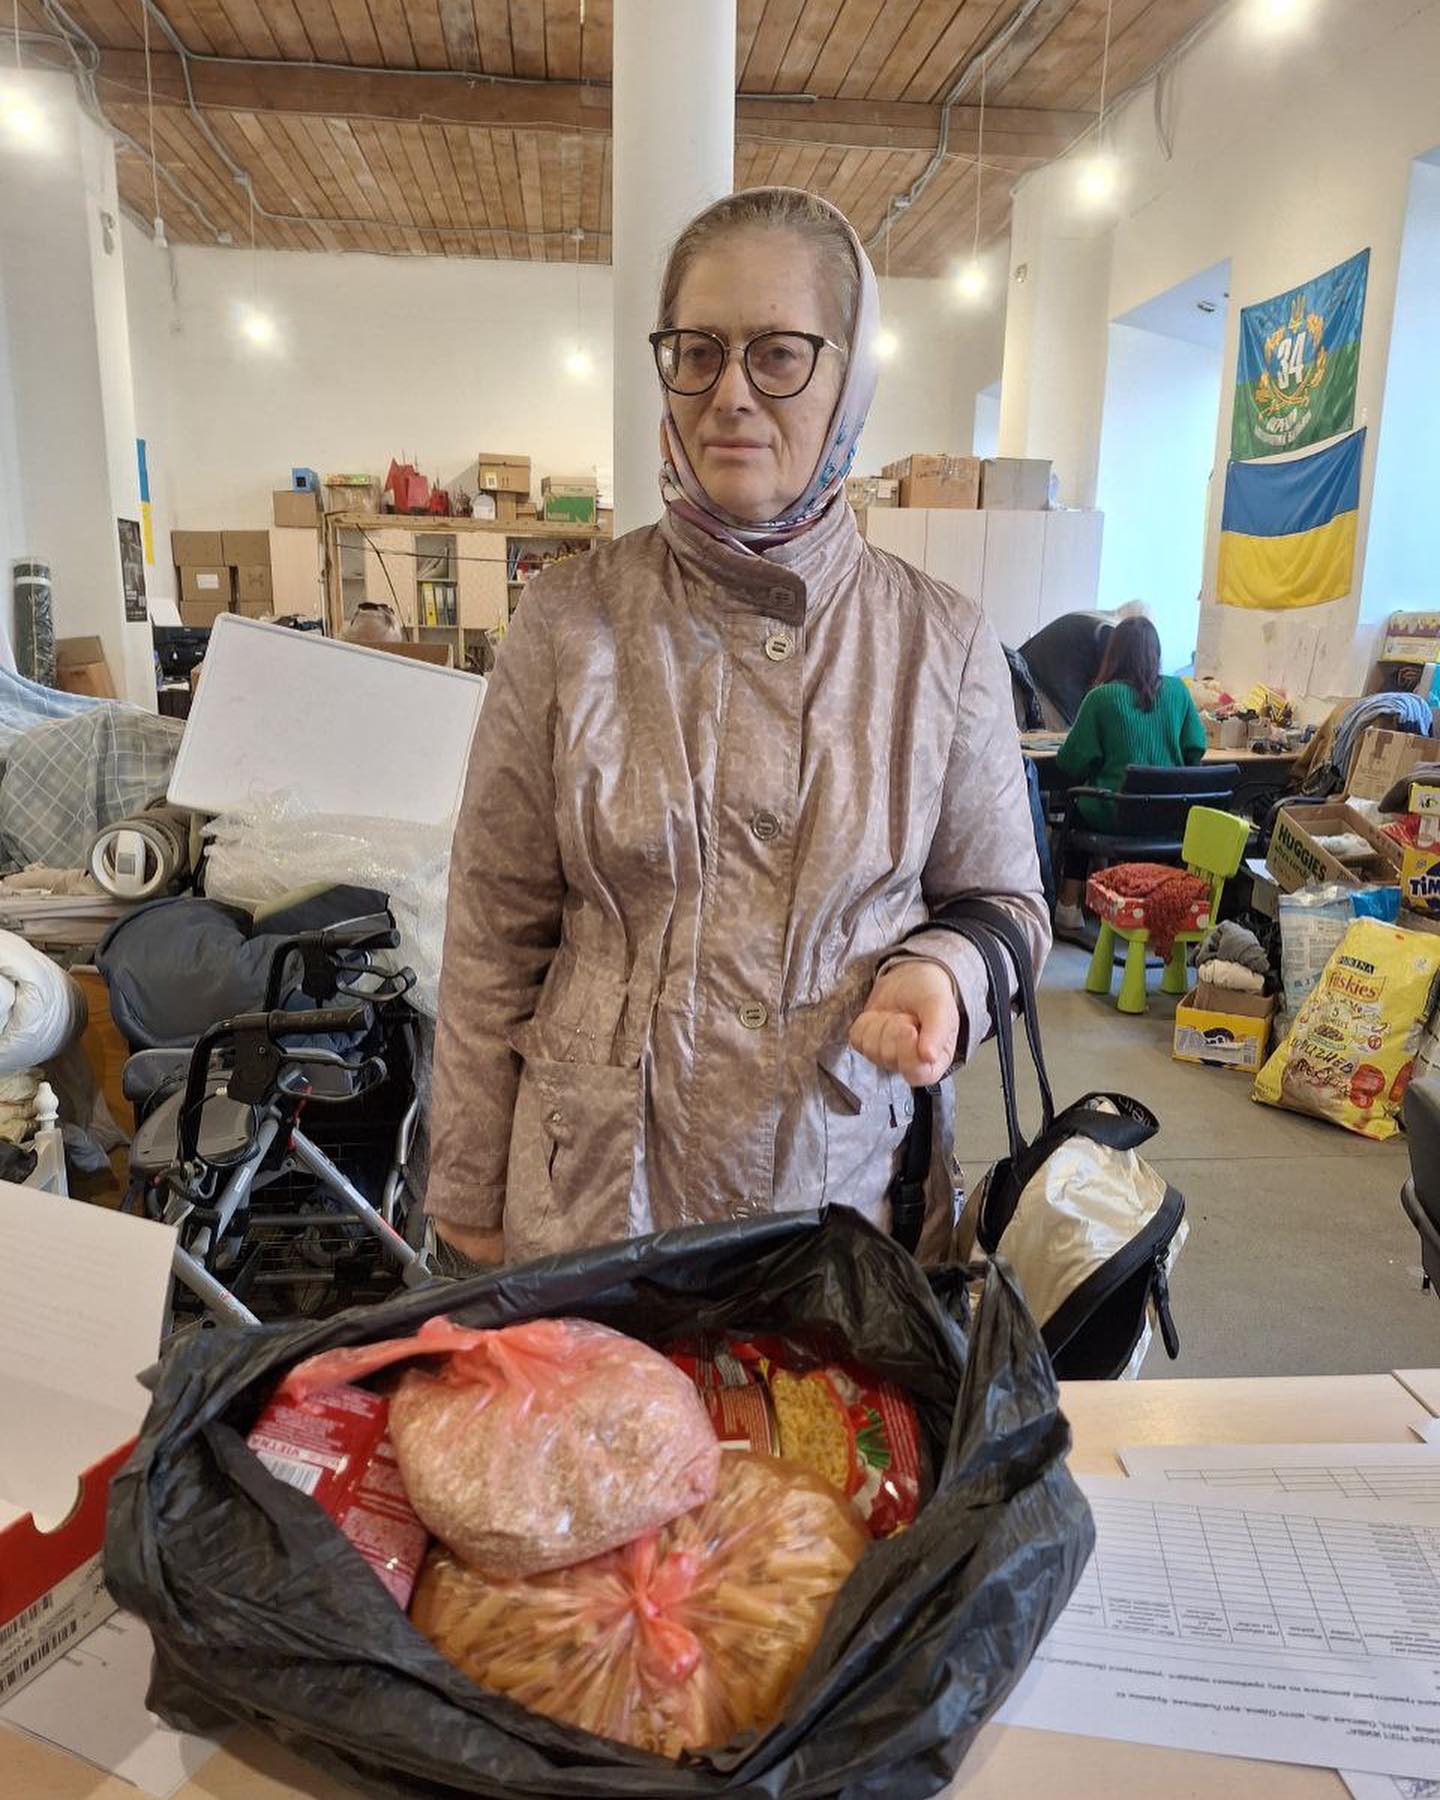 A woman standing next to a bag of food.